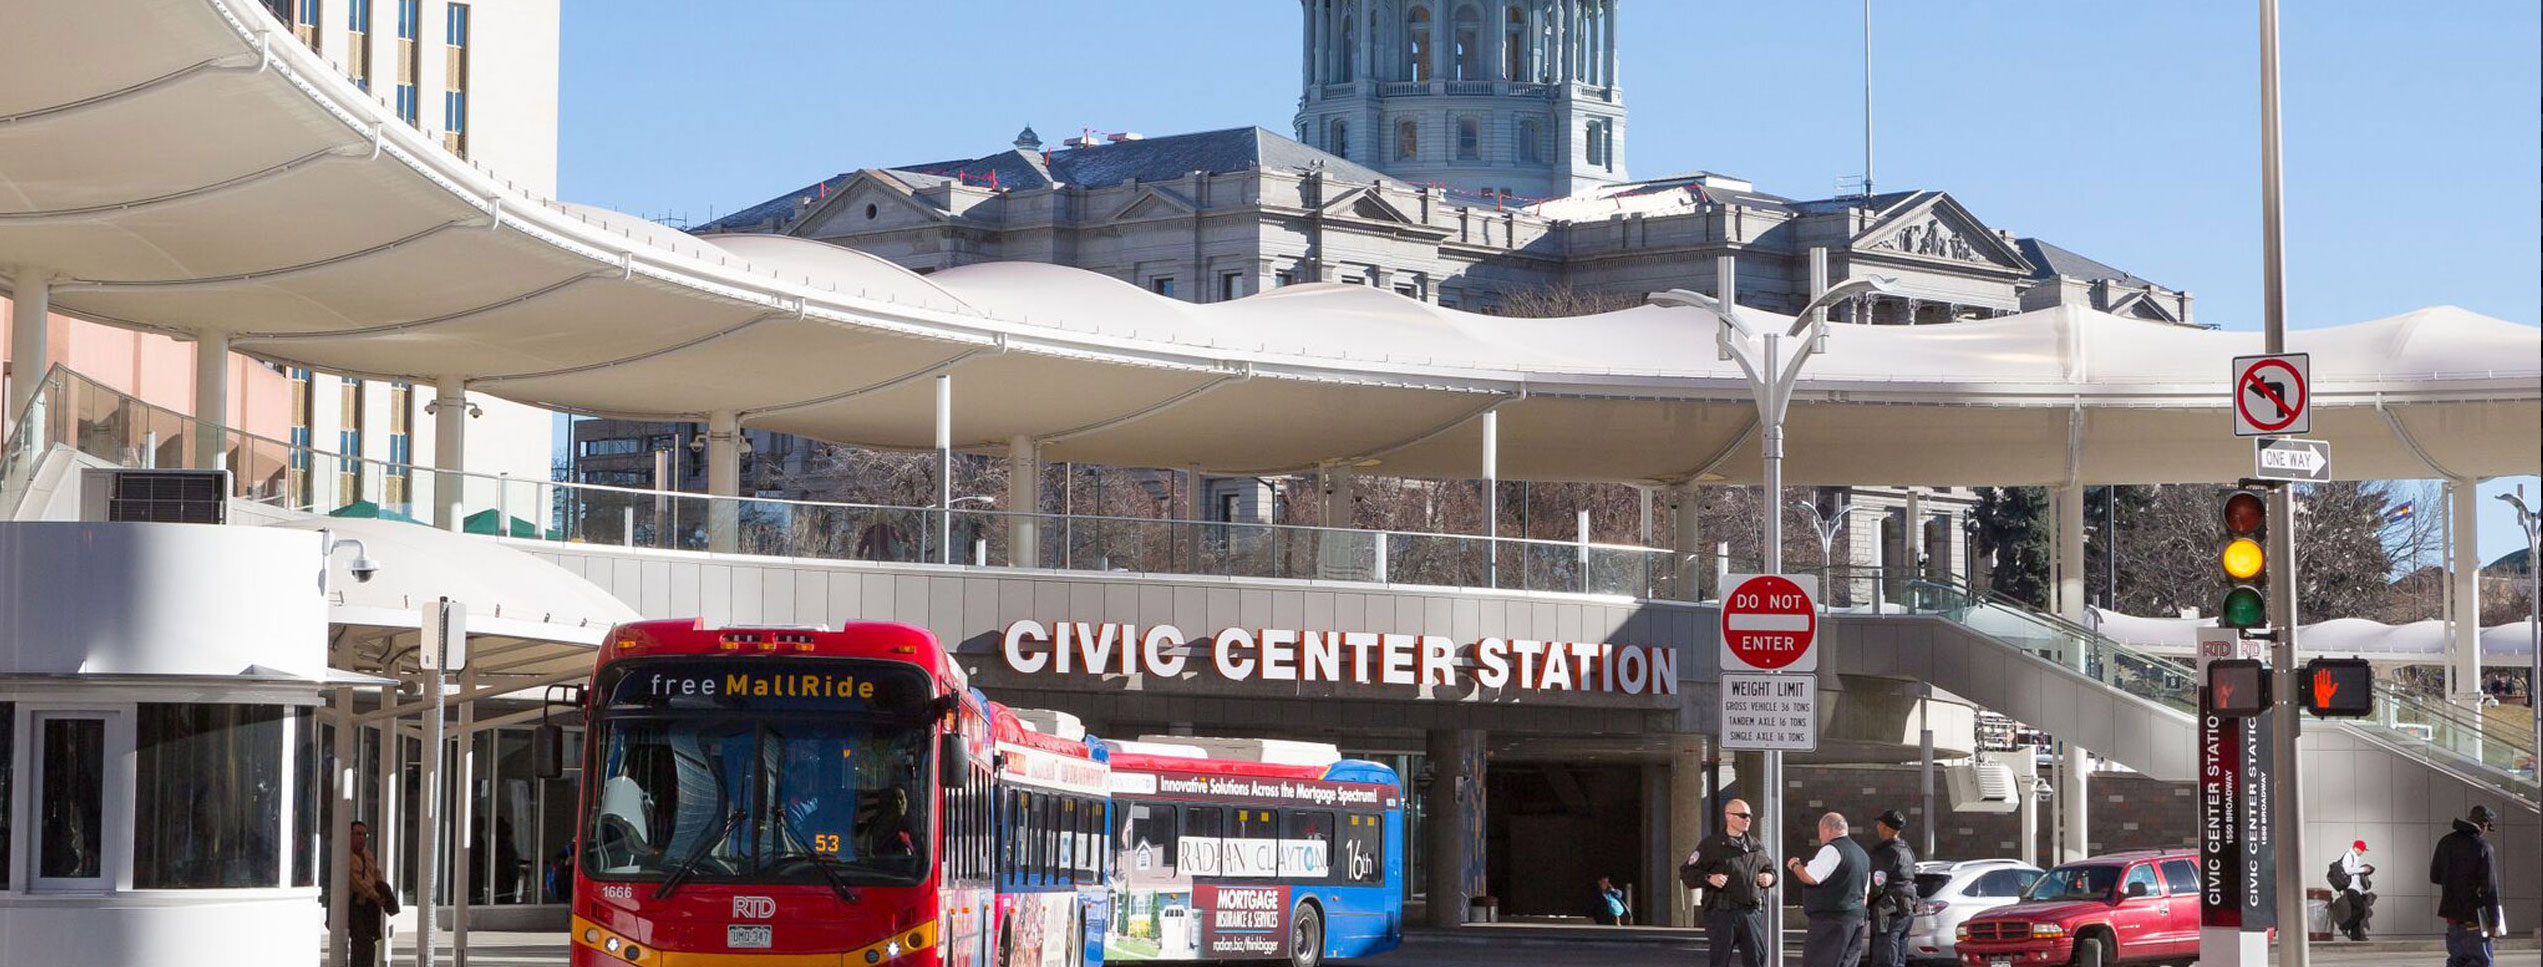 Civic Center Station with bus at stoplight